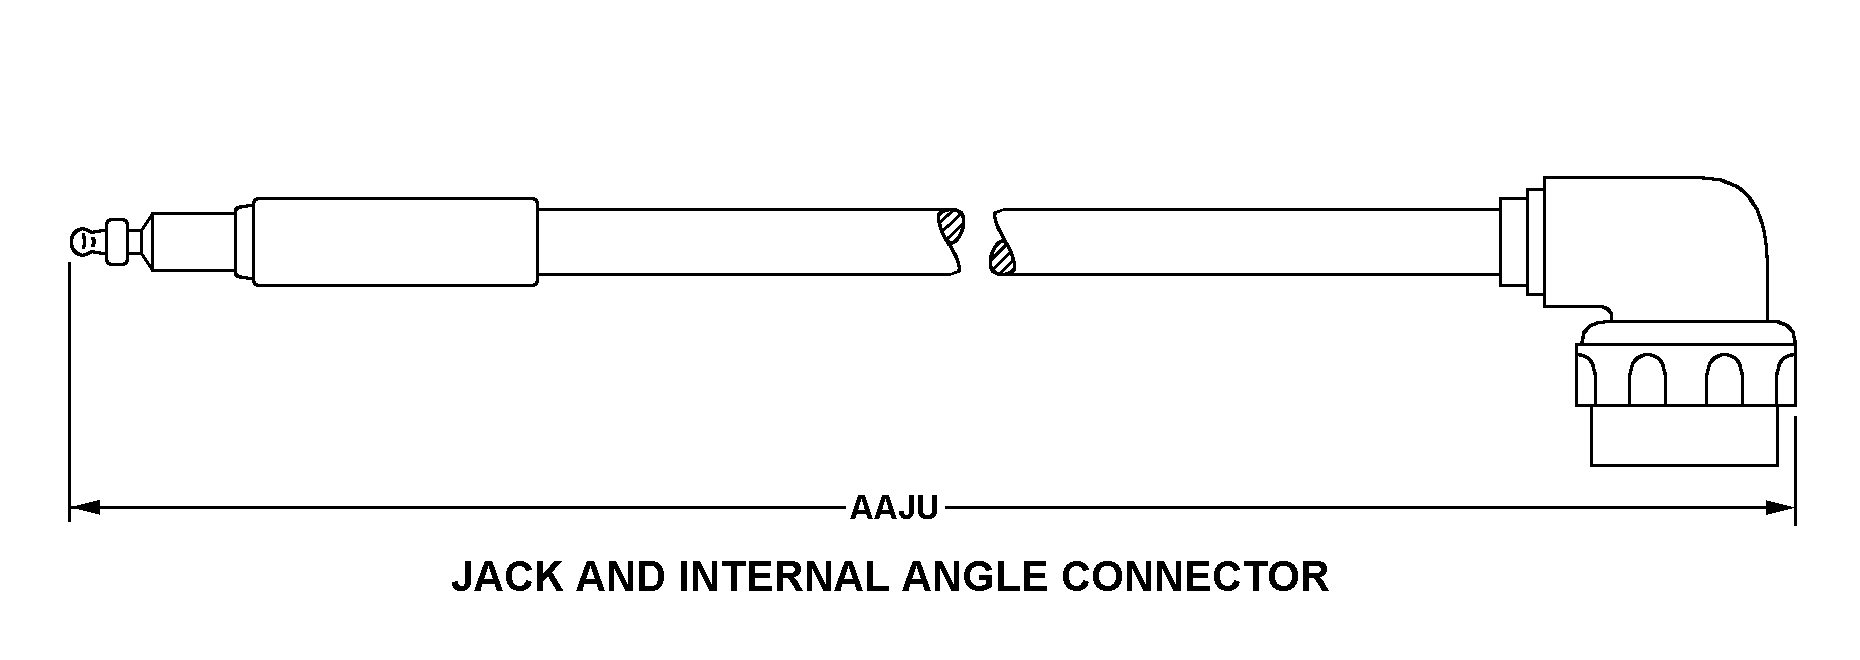 JACK AND INTERNAL ANGLE CONNECTOR style nsn 5995-01-080-4538